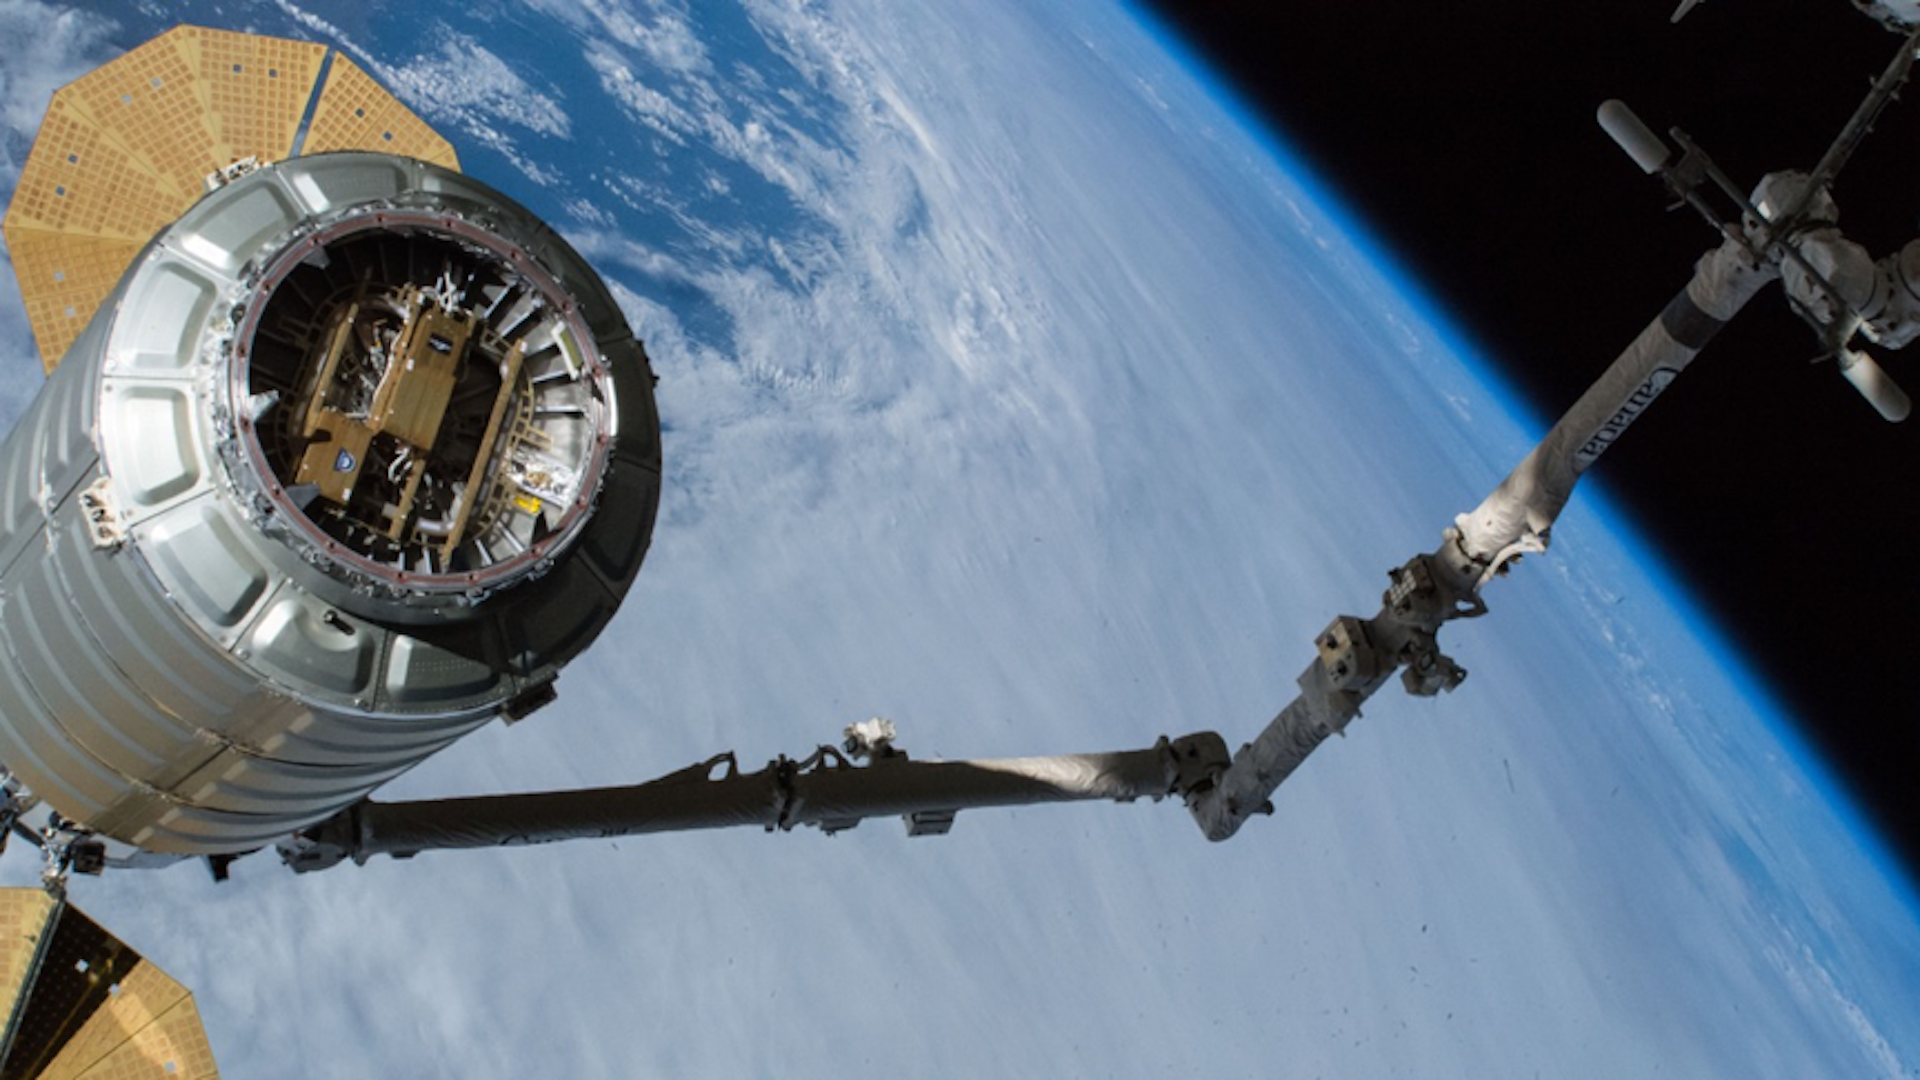 Cygnus spacecraft as it is leaving the International Space Station with UbiquitiLink's payload attached